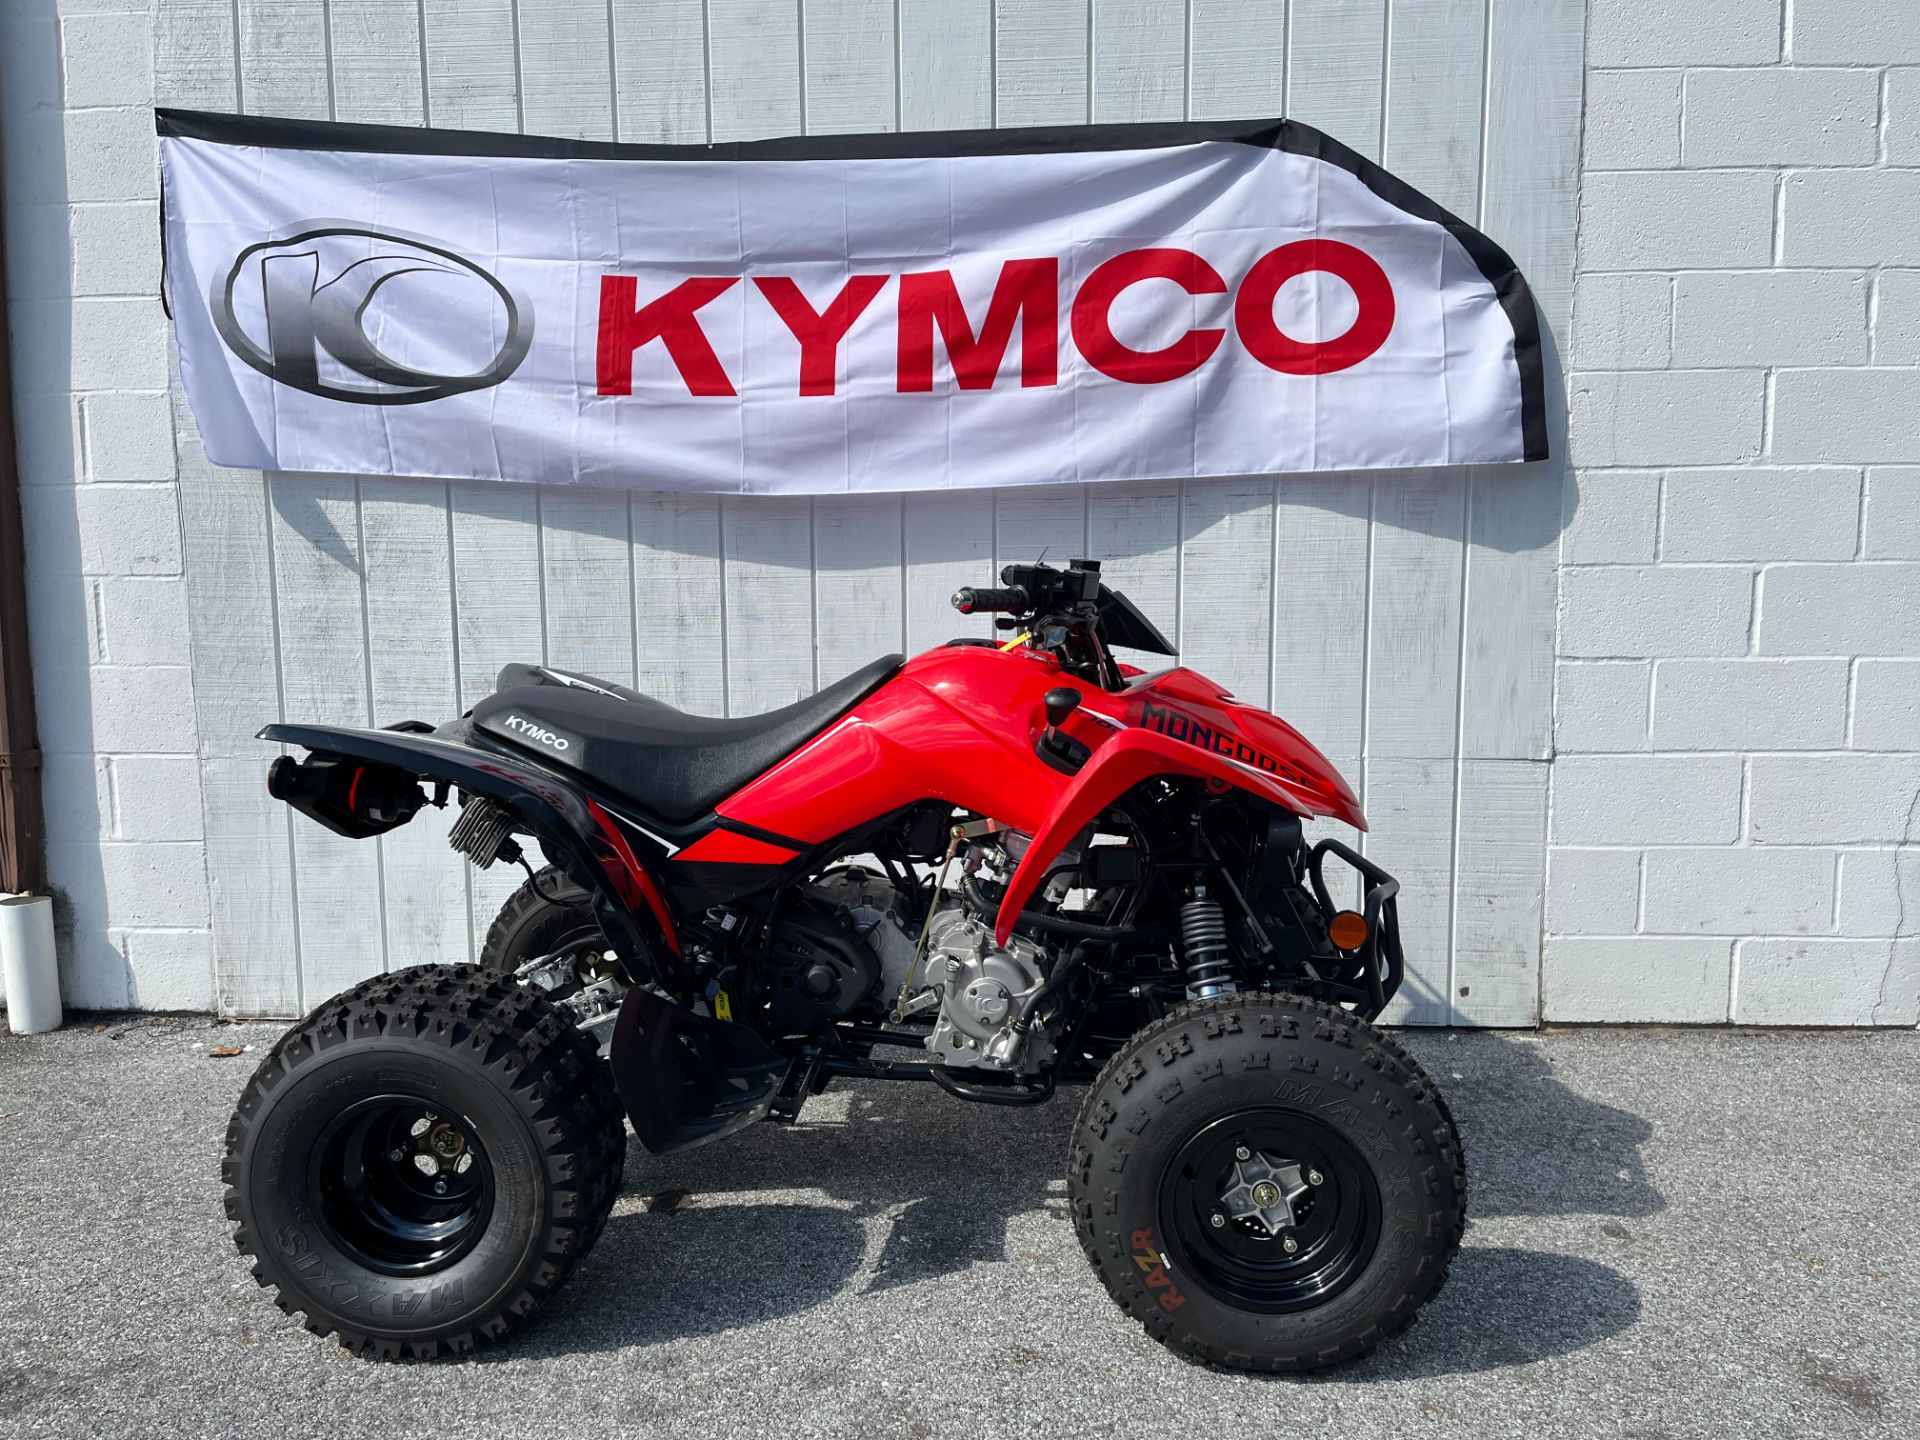 2023 Kymco Mongoose 270i in West Chester, Pennsylvania - Photo 2